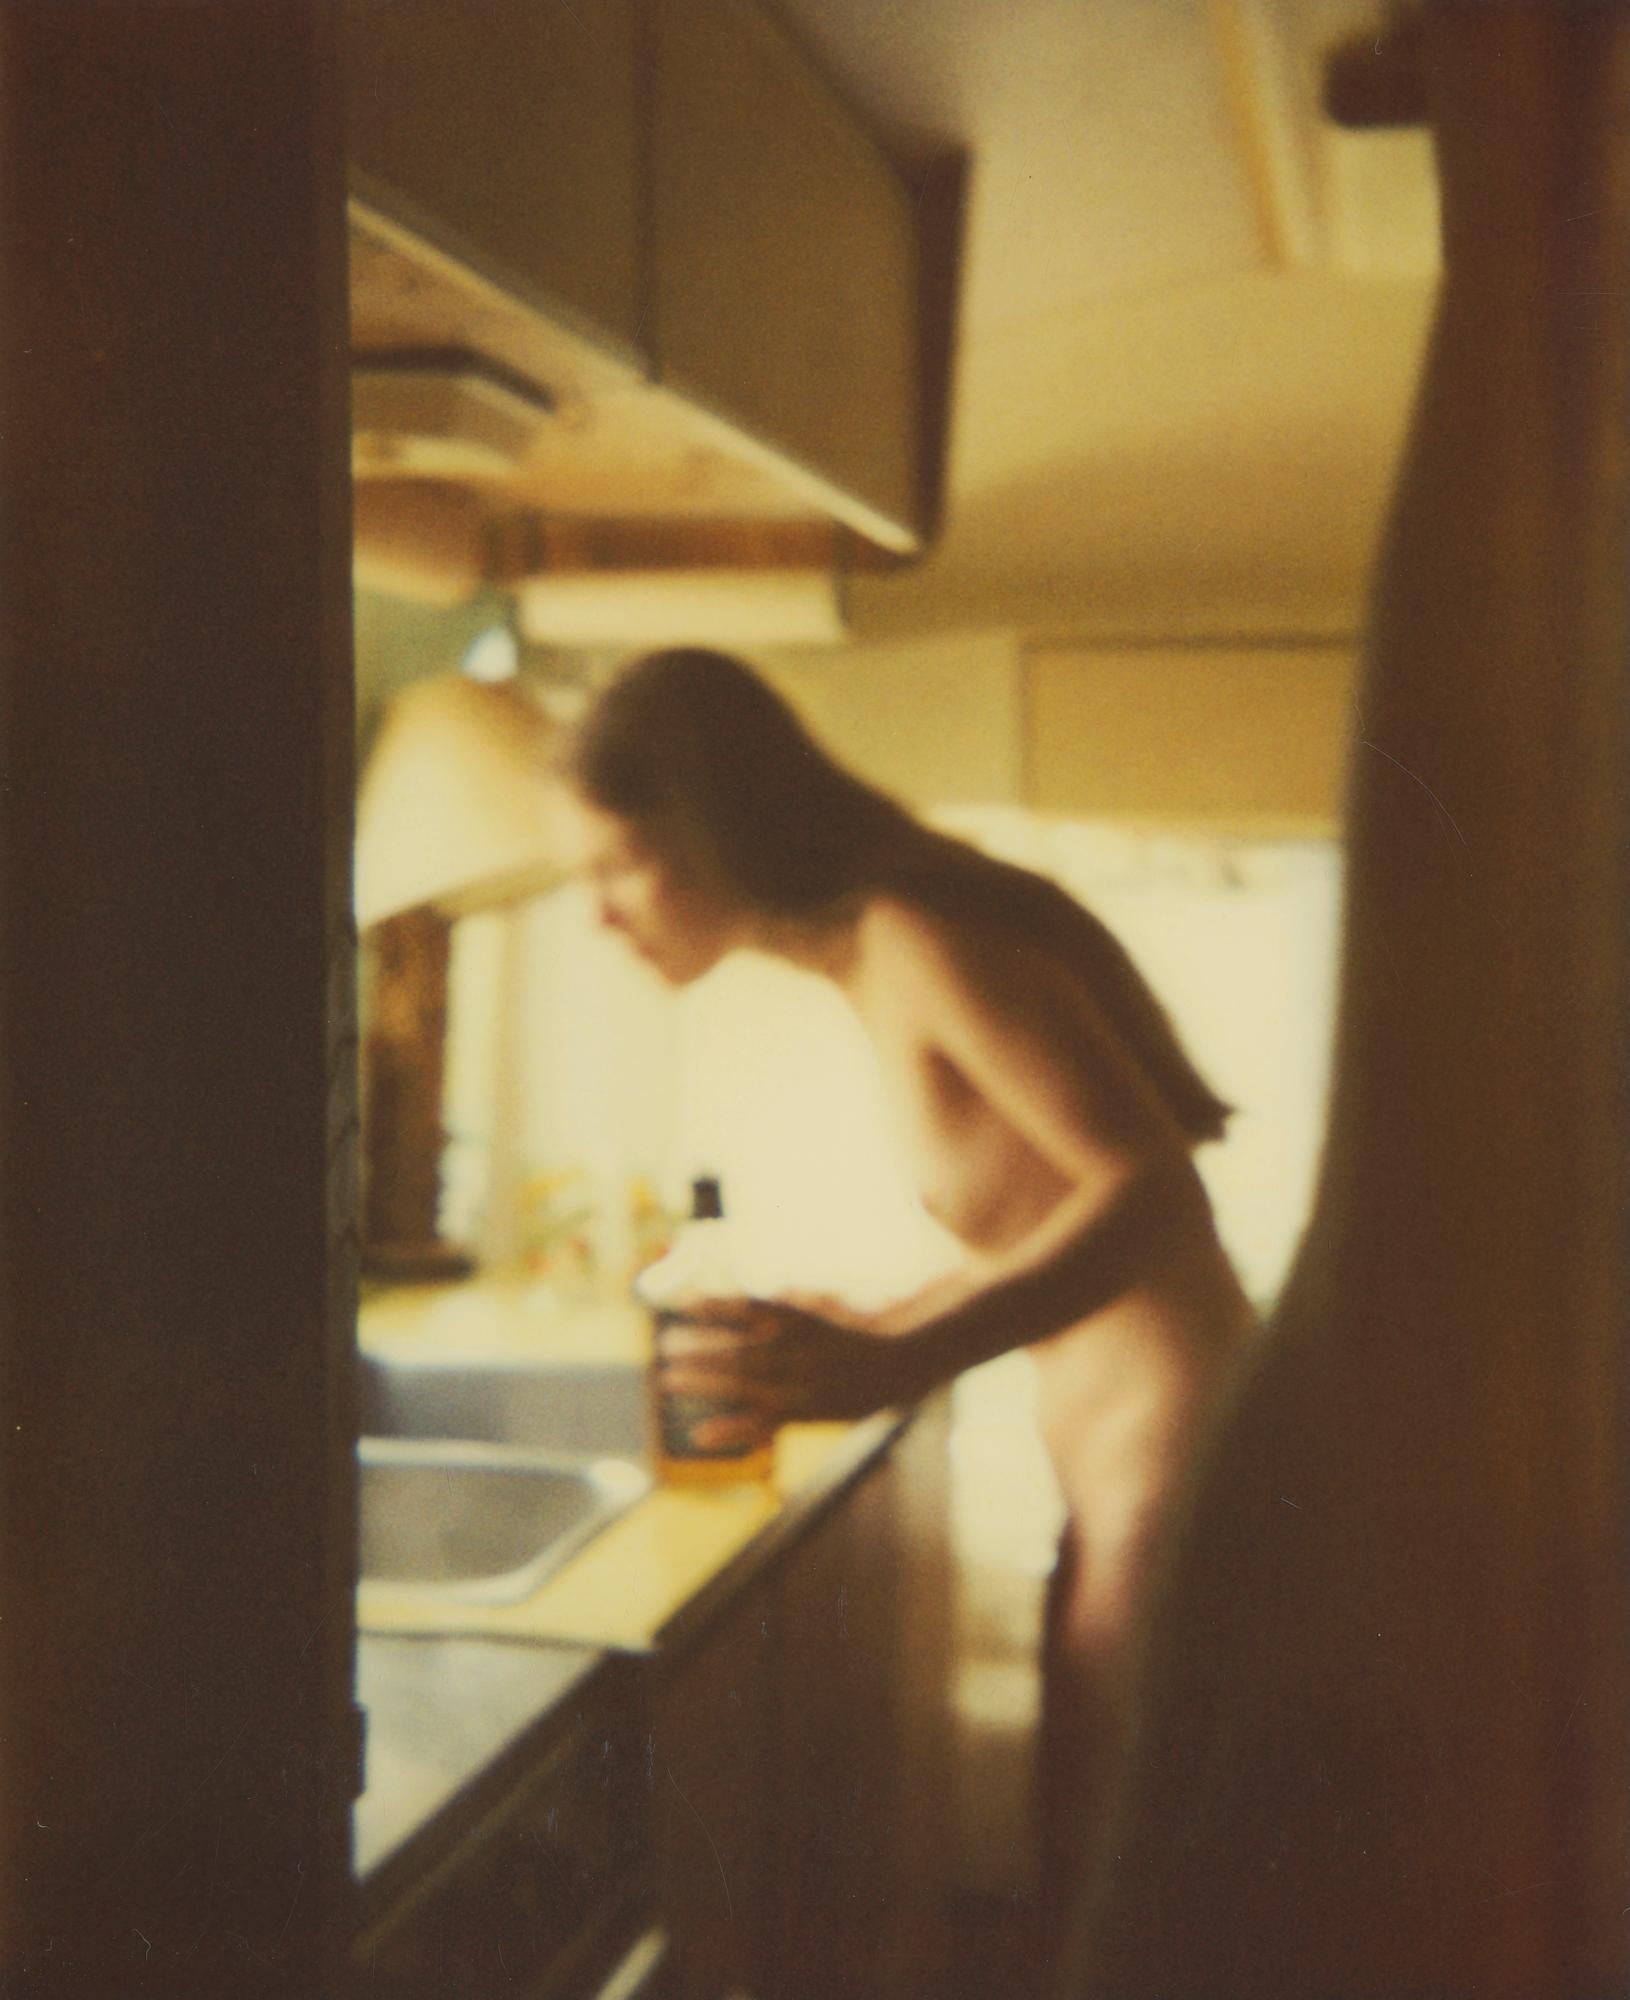 Whisky and Water VI (Sidewinder) - Diptych, Polaroid, Nude, 21st Century, Color - Photograph by Stefanie Schneider